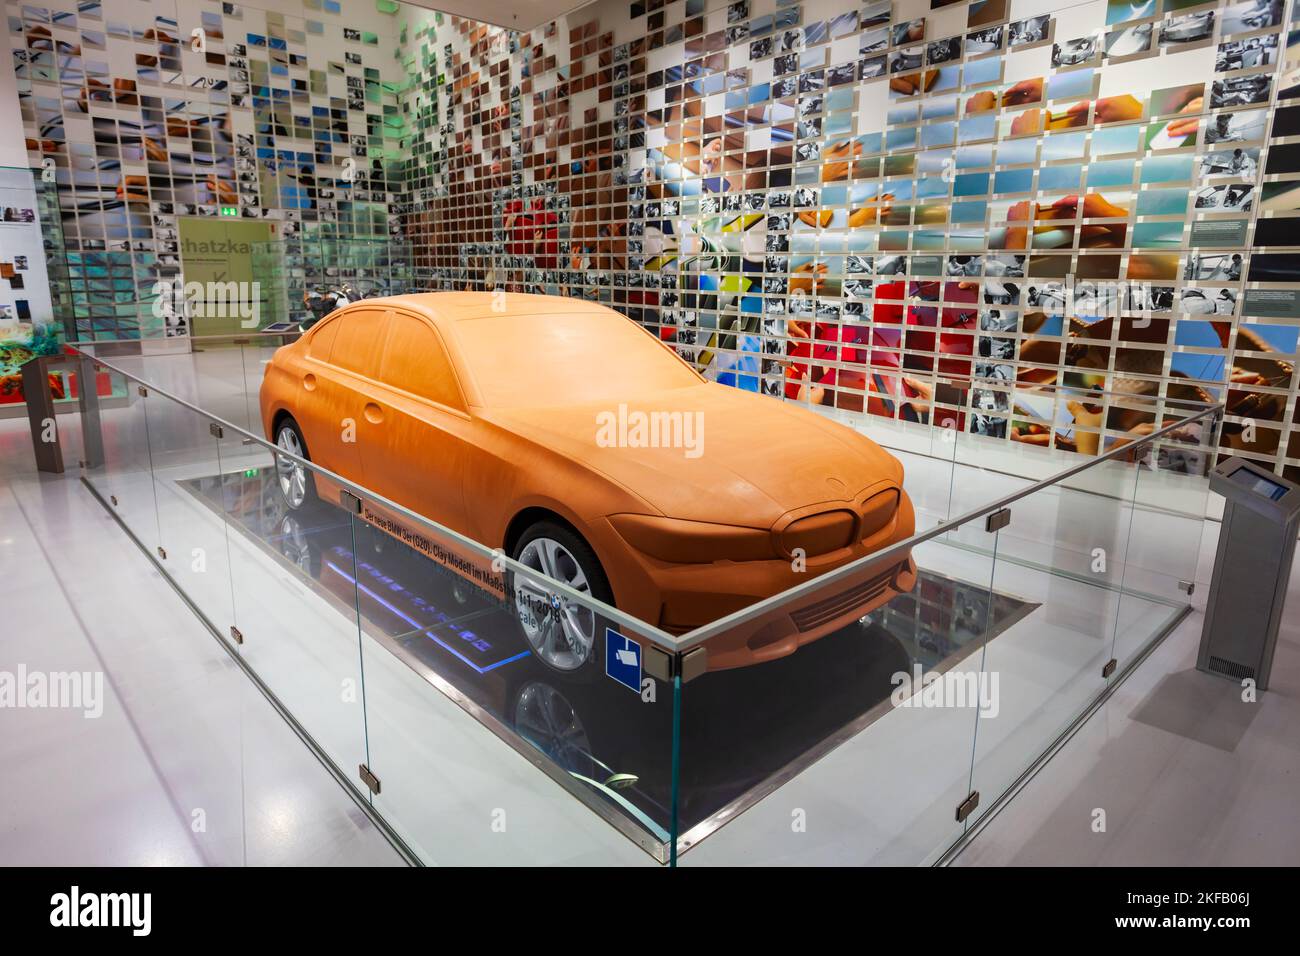 Munich, Germany - July 08, 2021: BMW 3er G20 series clay model in BMW Museum. It is an automobile museum of BMW history located near the Olympiapark i Stock Photo